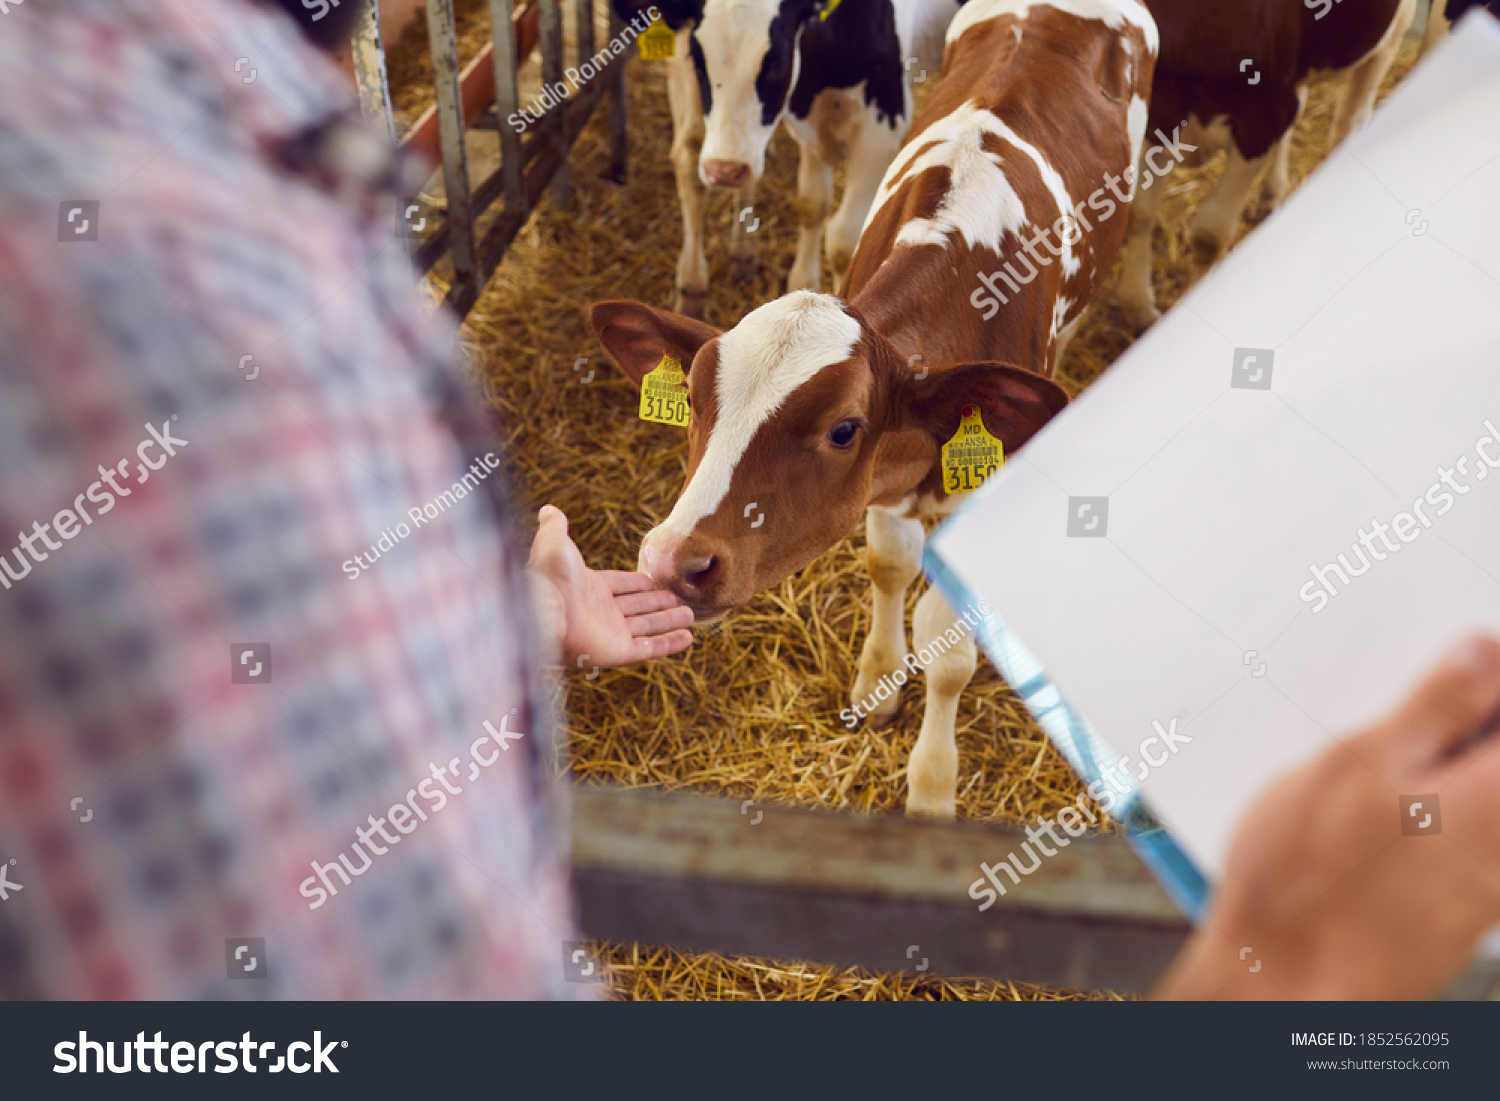 Over shoulder close-up of farmer with clipboard taking care of cute little calf with ear tags standing in cow barn on cattle farm. Concepts of ranch farming business and livestock monitoring #1852562095